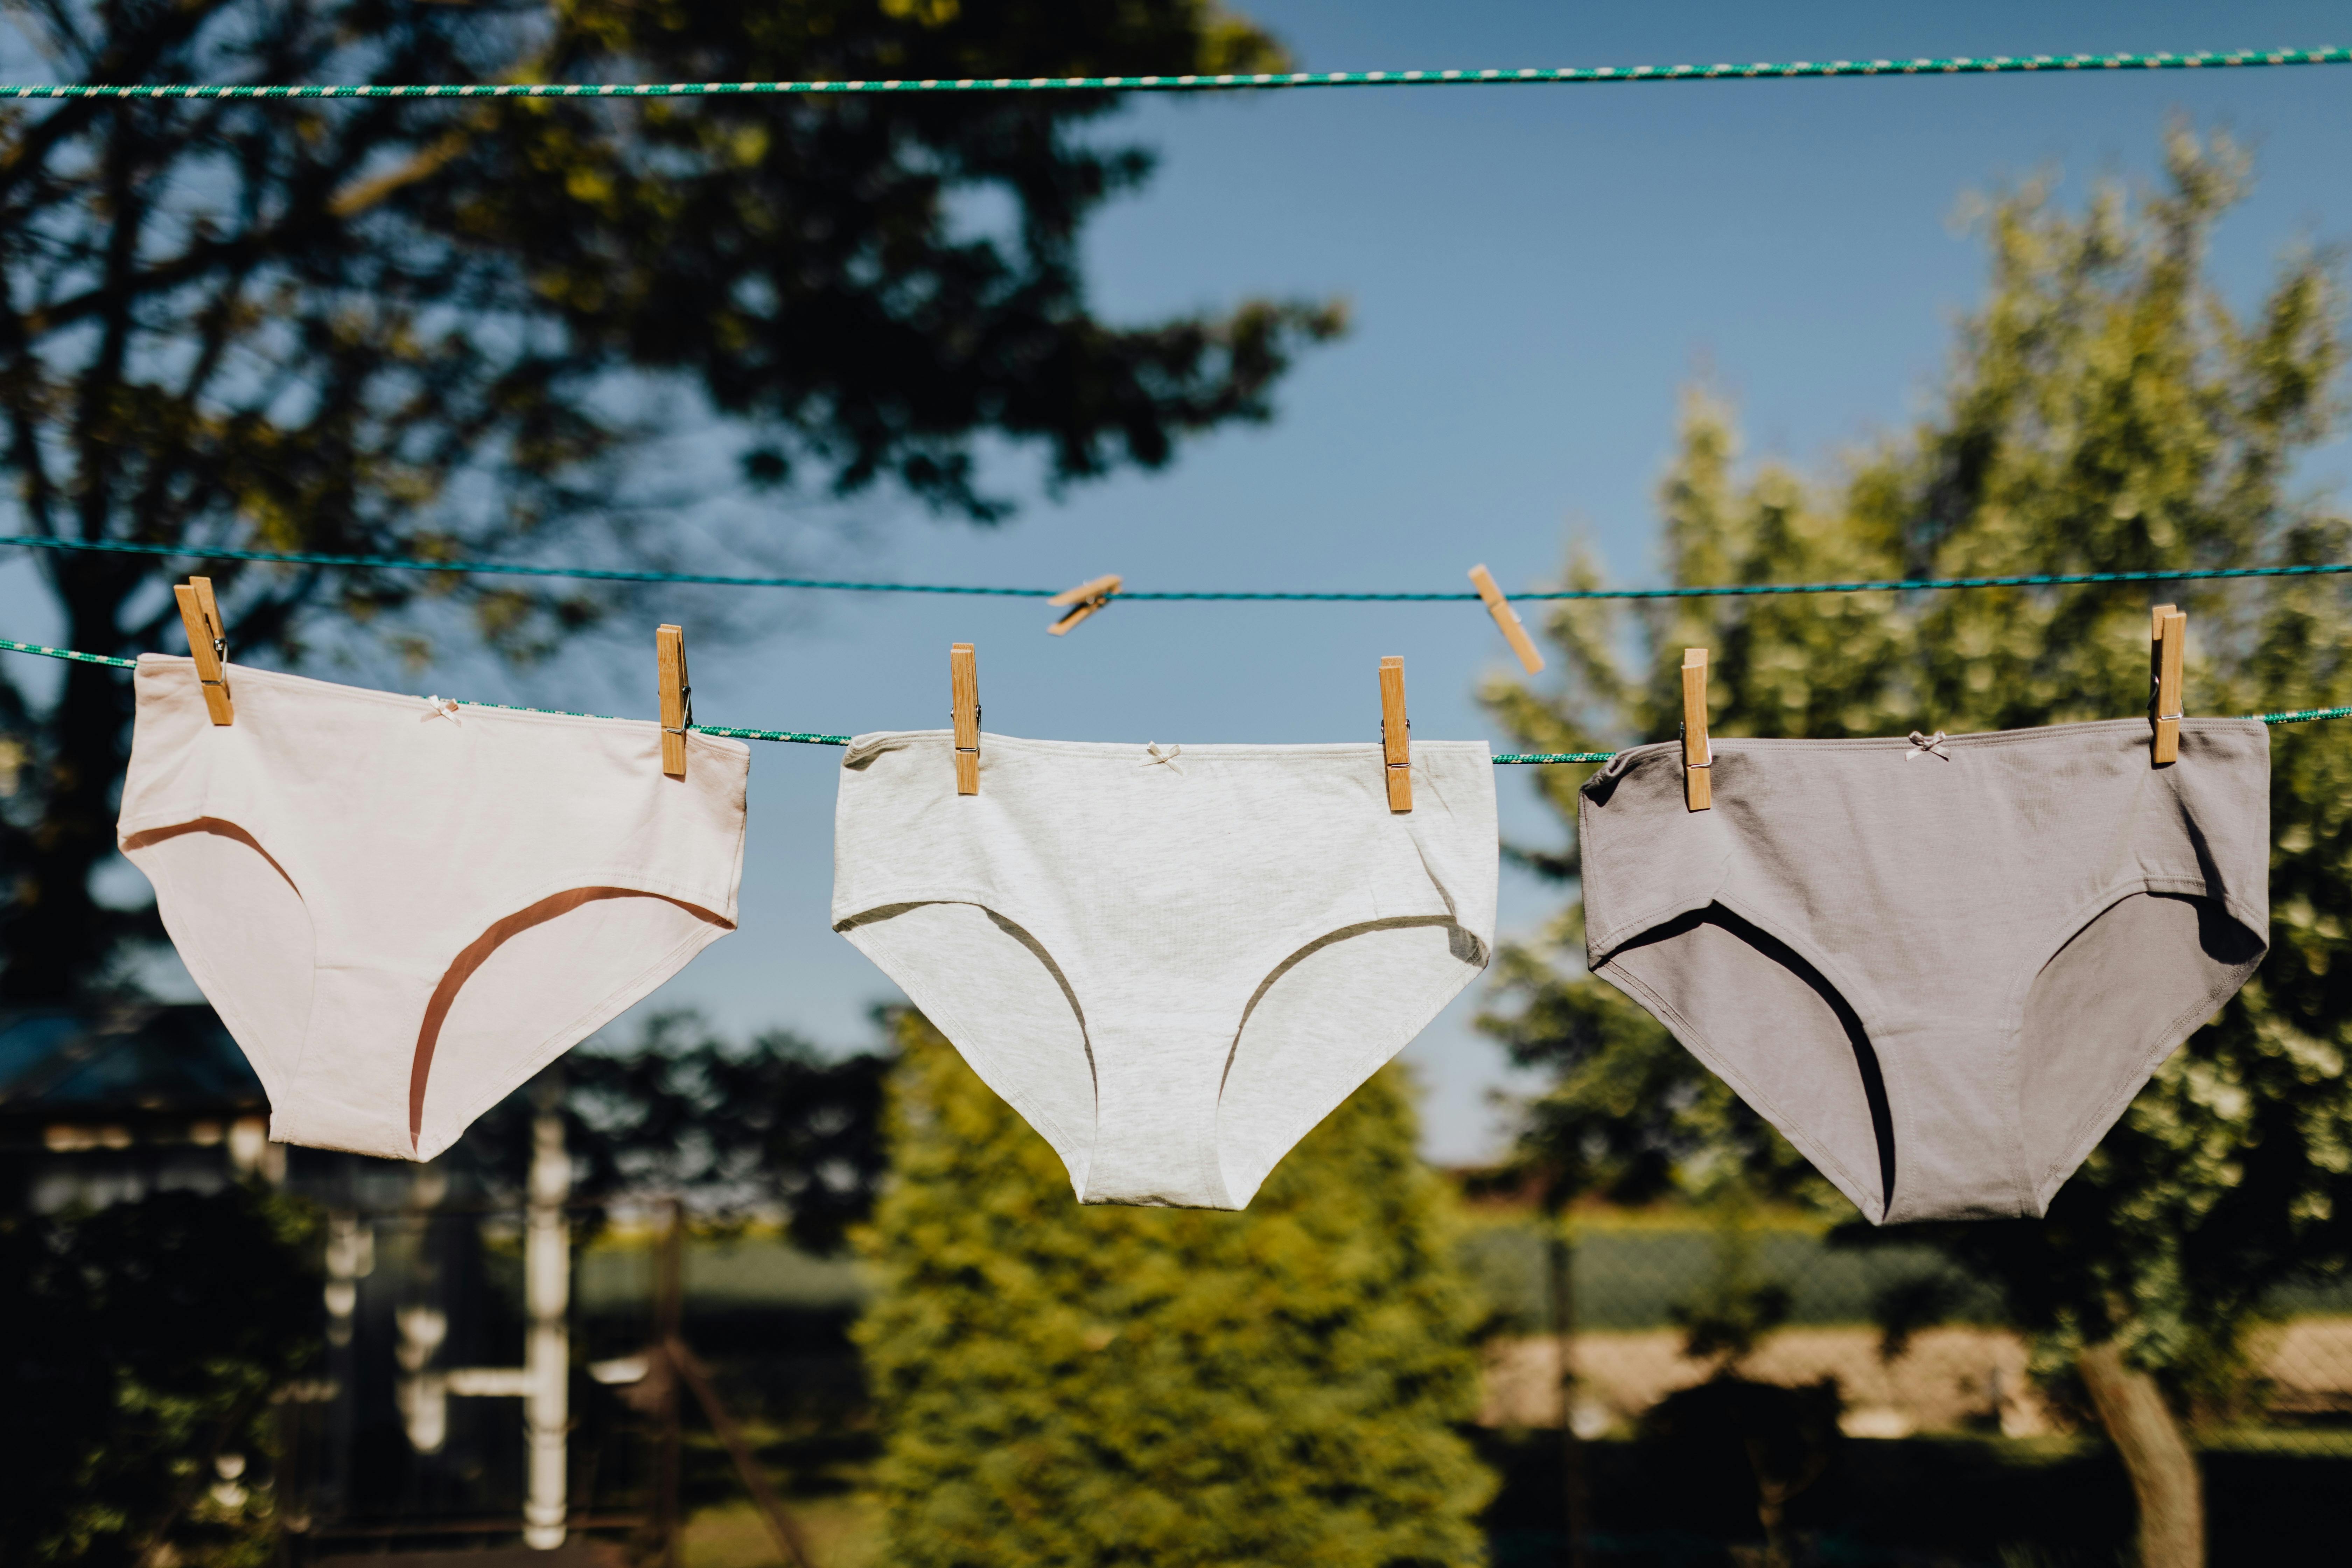 Feminine underwear drying on rope with clothespins on fresh air · Free  Stock Photo